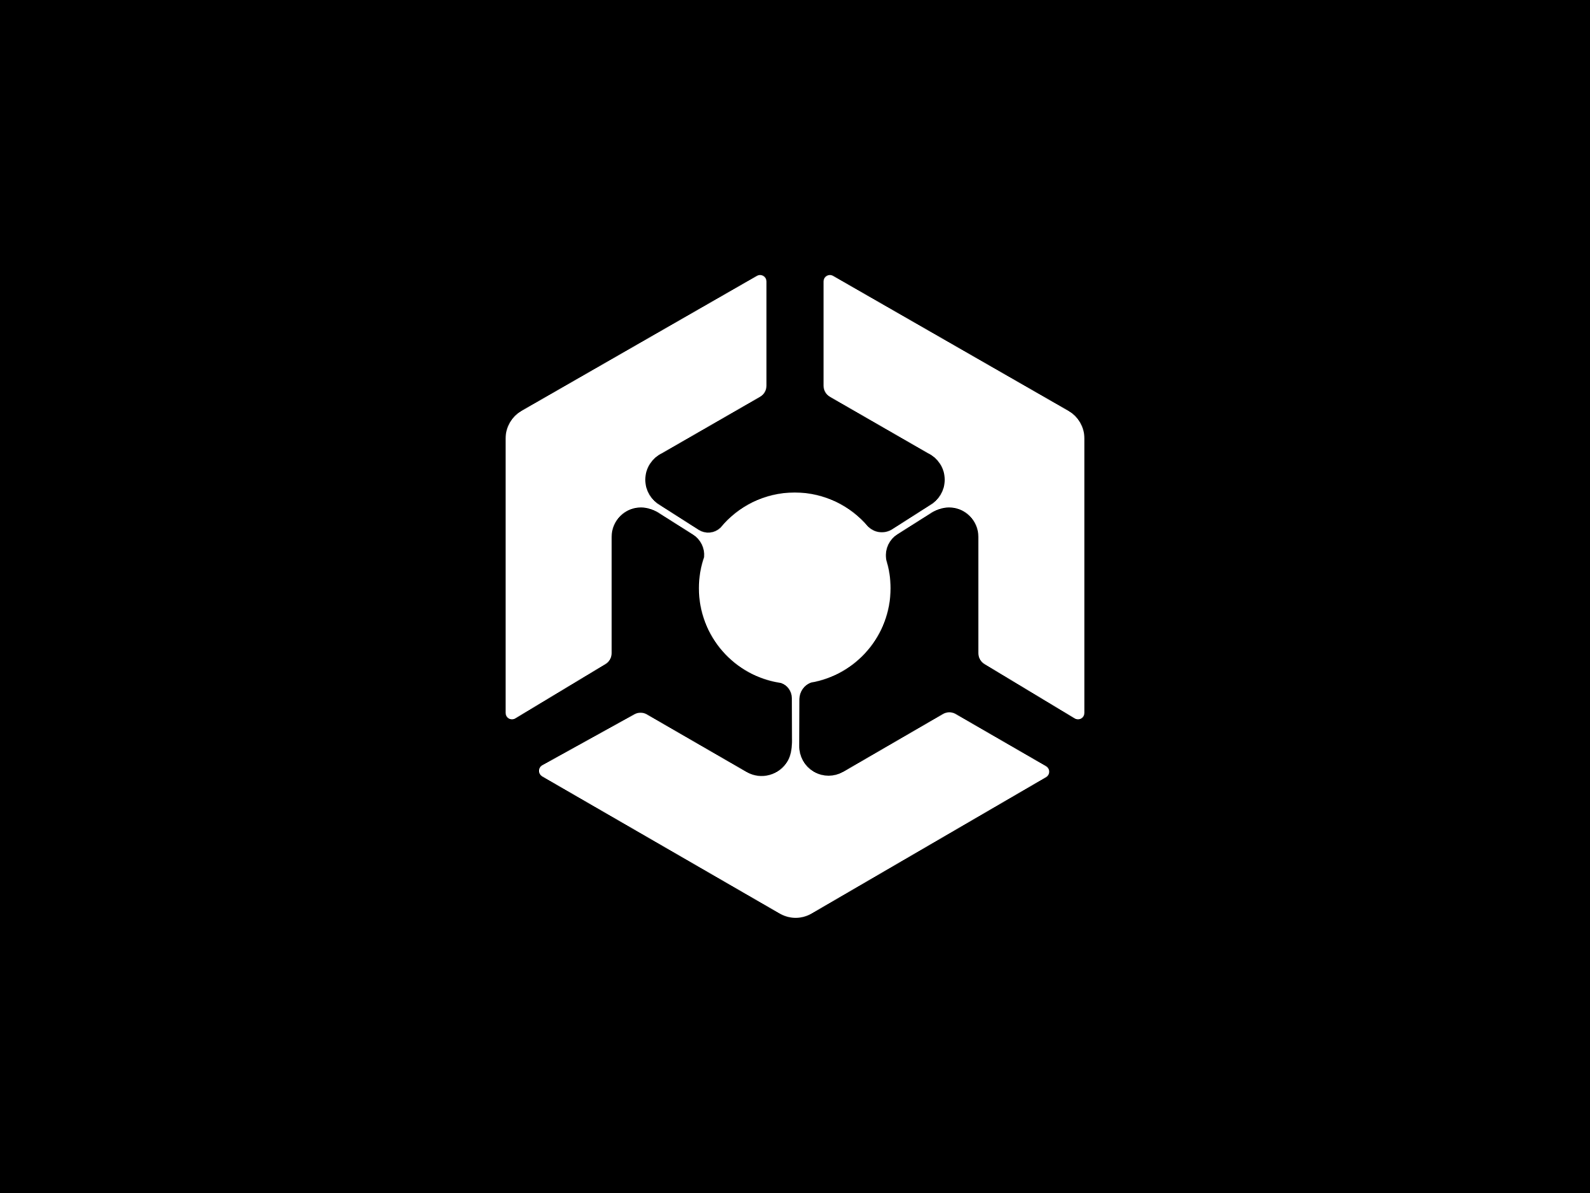 Hexagon by Constantinos on Dribbble